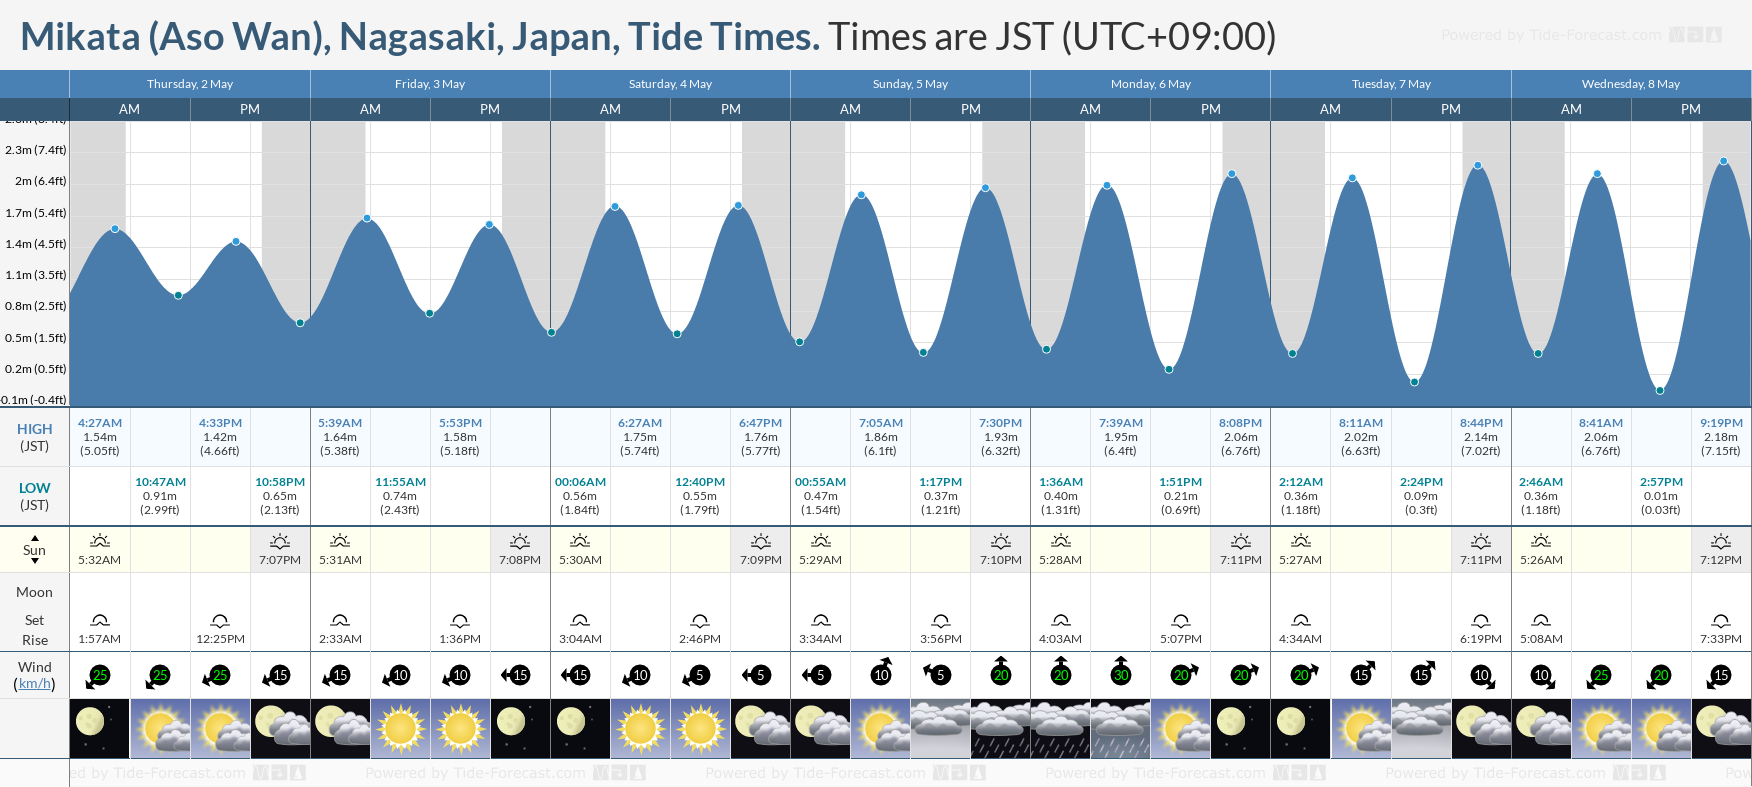 Mikata (Aso Wan), Nagasaki, Japan Tide Chart including high and low tide times for the next 7 days